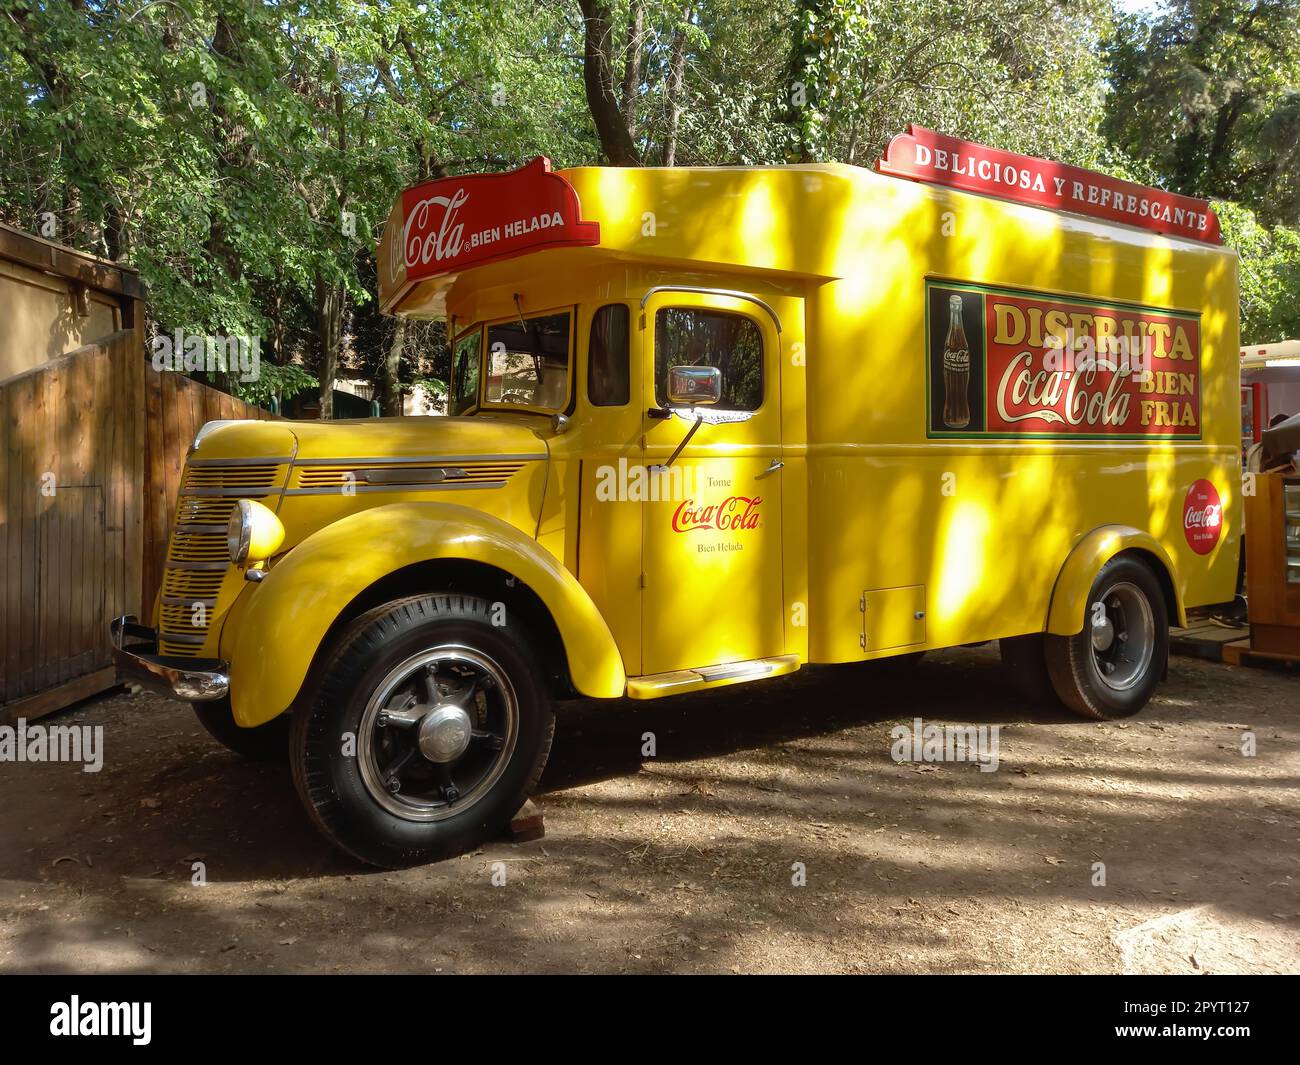 A vintage yellow 1930s International Harvester Coca-Cola delivery truck in a park. Stock Photo